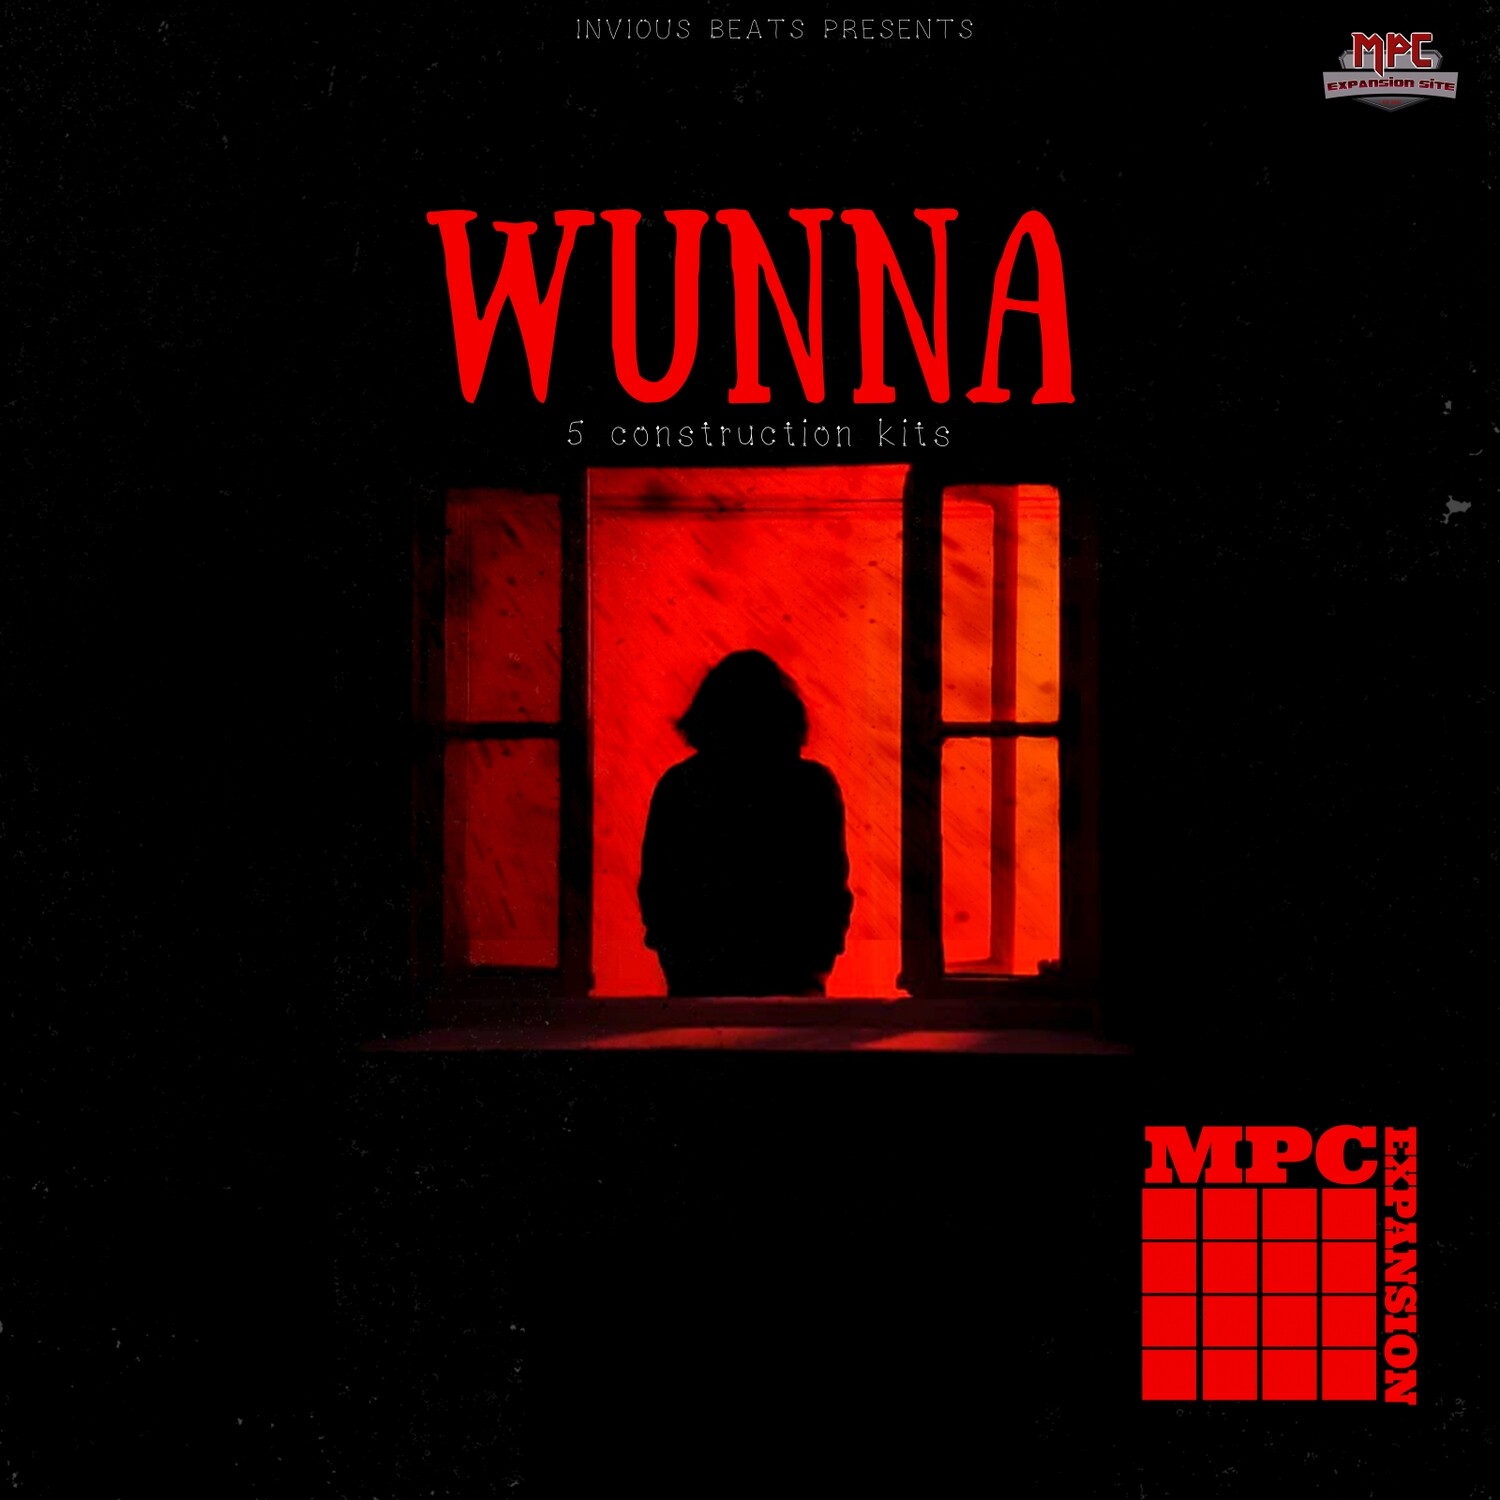 MPC EXPANSION 'WUNNA' by INVIOUS